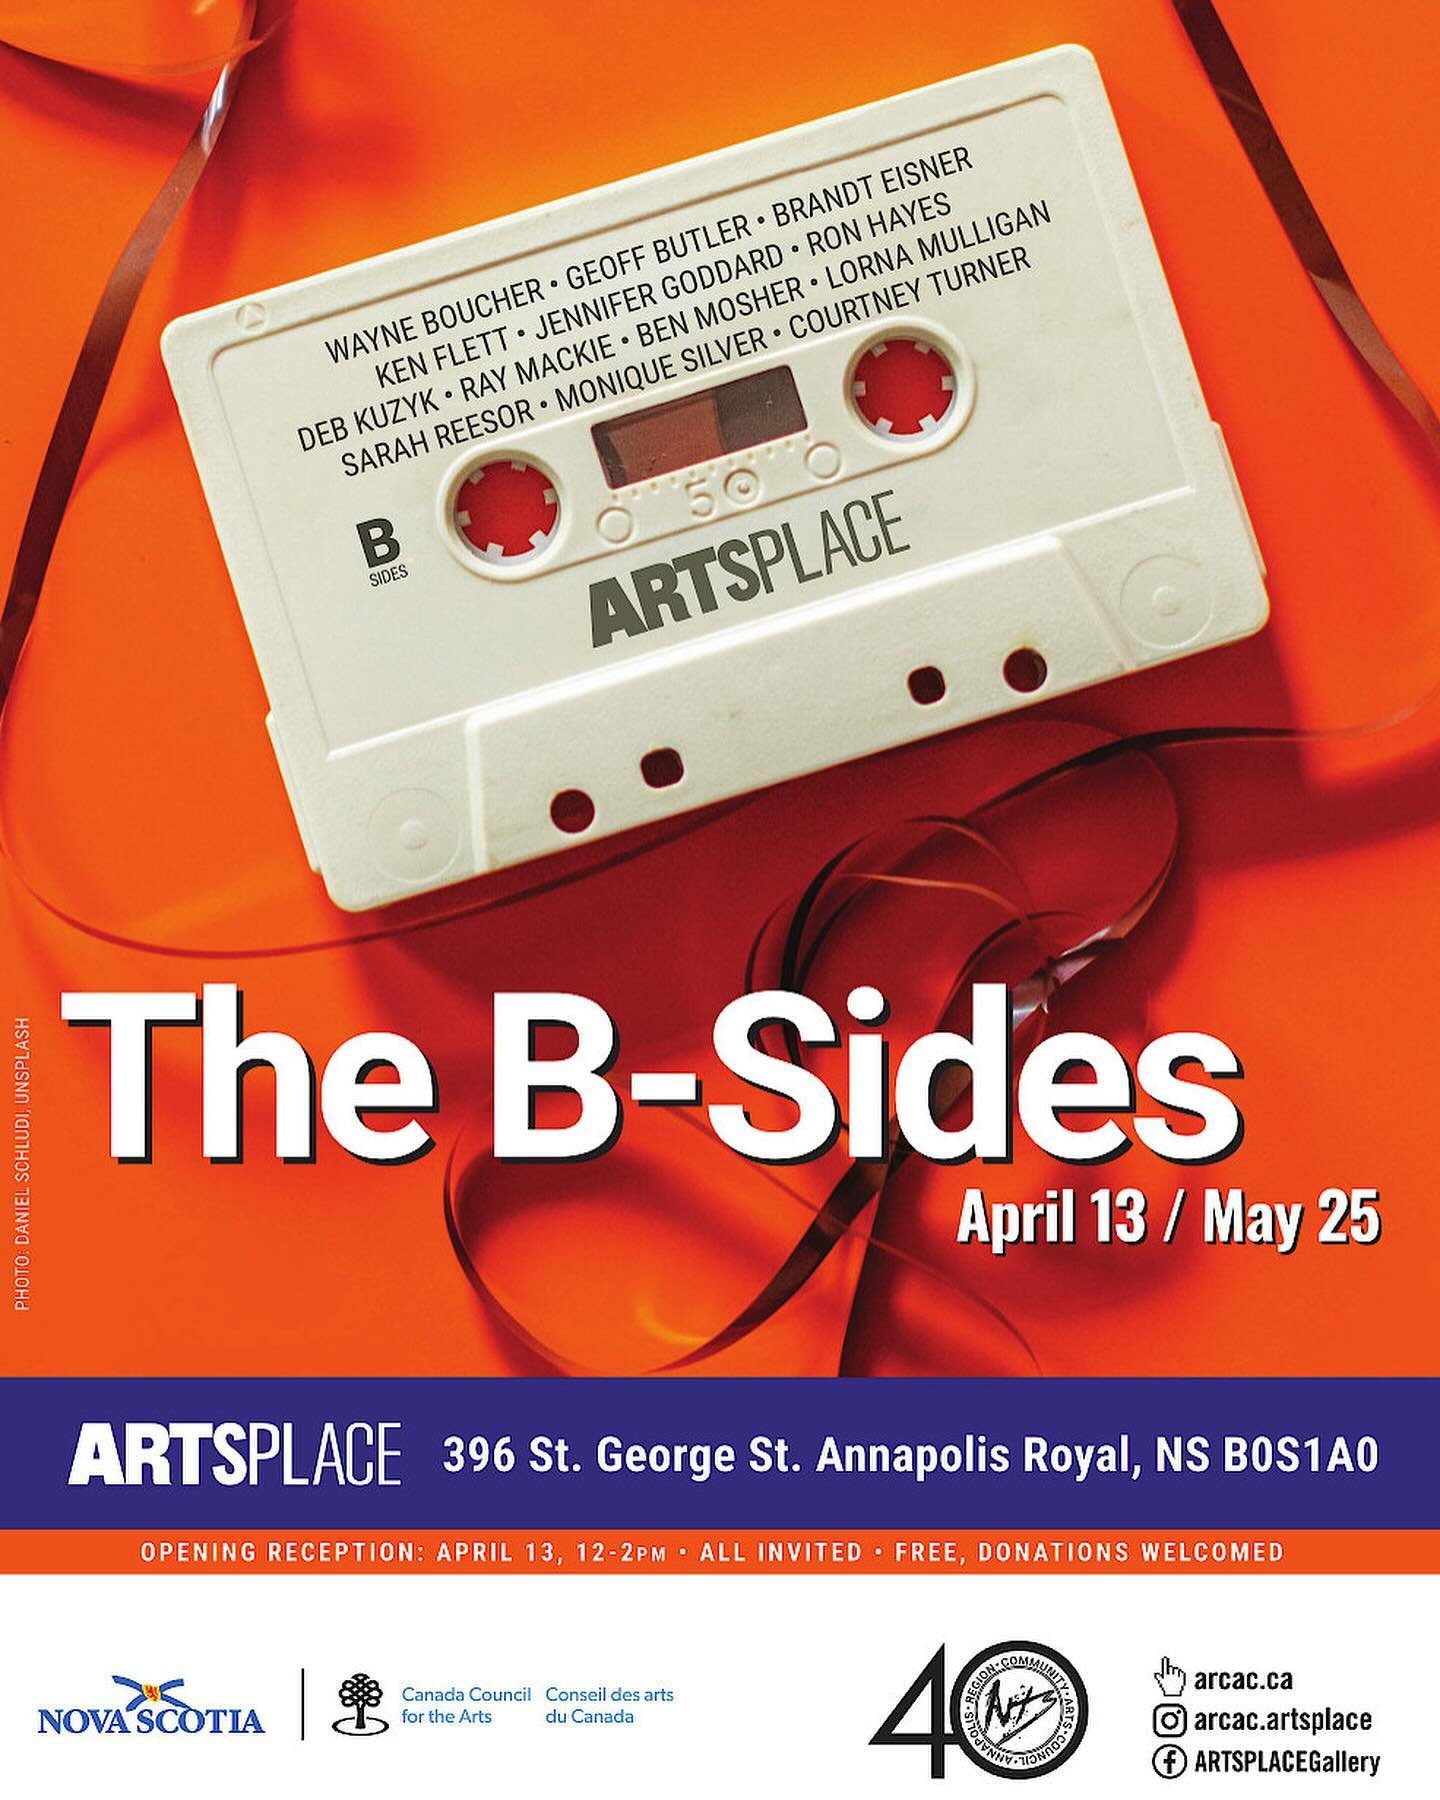 TOMORROW! Come to @arcac.artsplace for 4 great exhibition openings, including the B-Sides. ARCAC is an artist-run centre, literally, it&rsquo;s run by artists. So I am allowed to do stuff like work on site with wet clay. ❤️ artists. This exhibition i